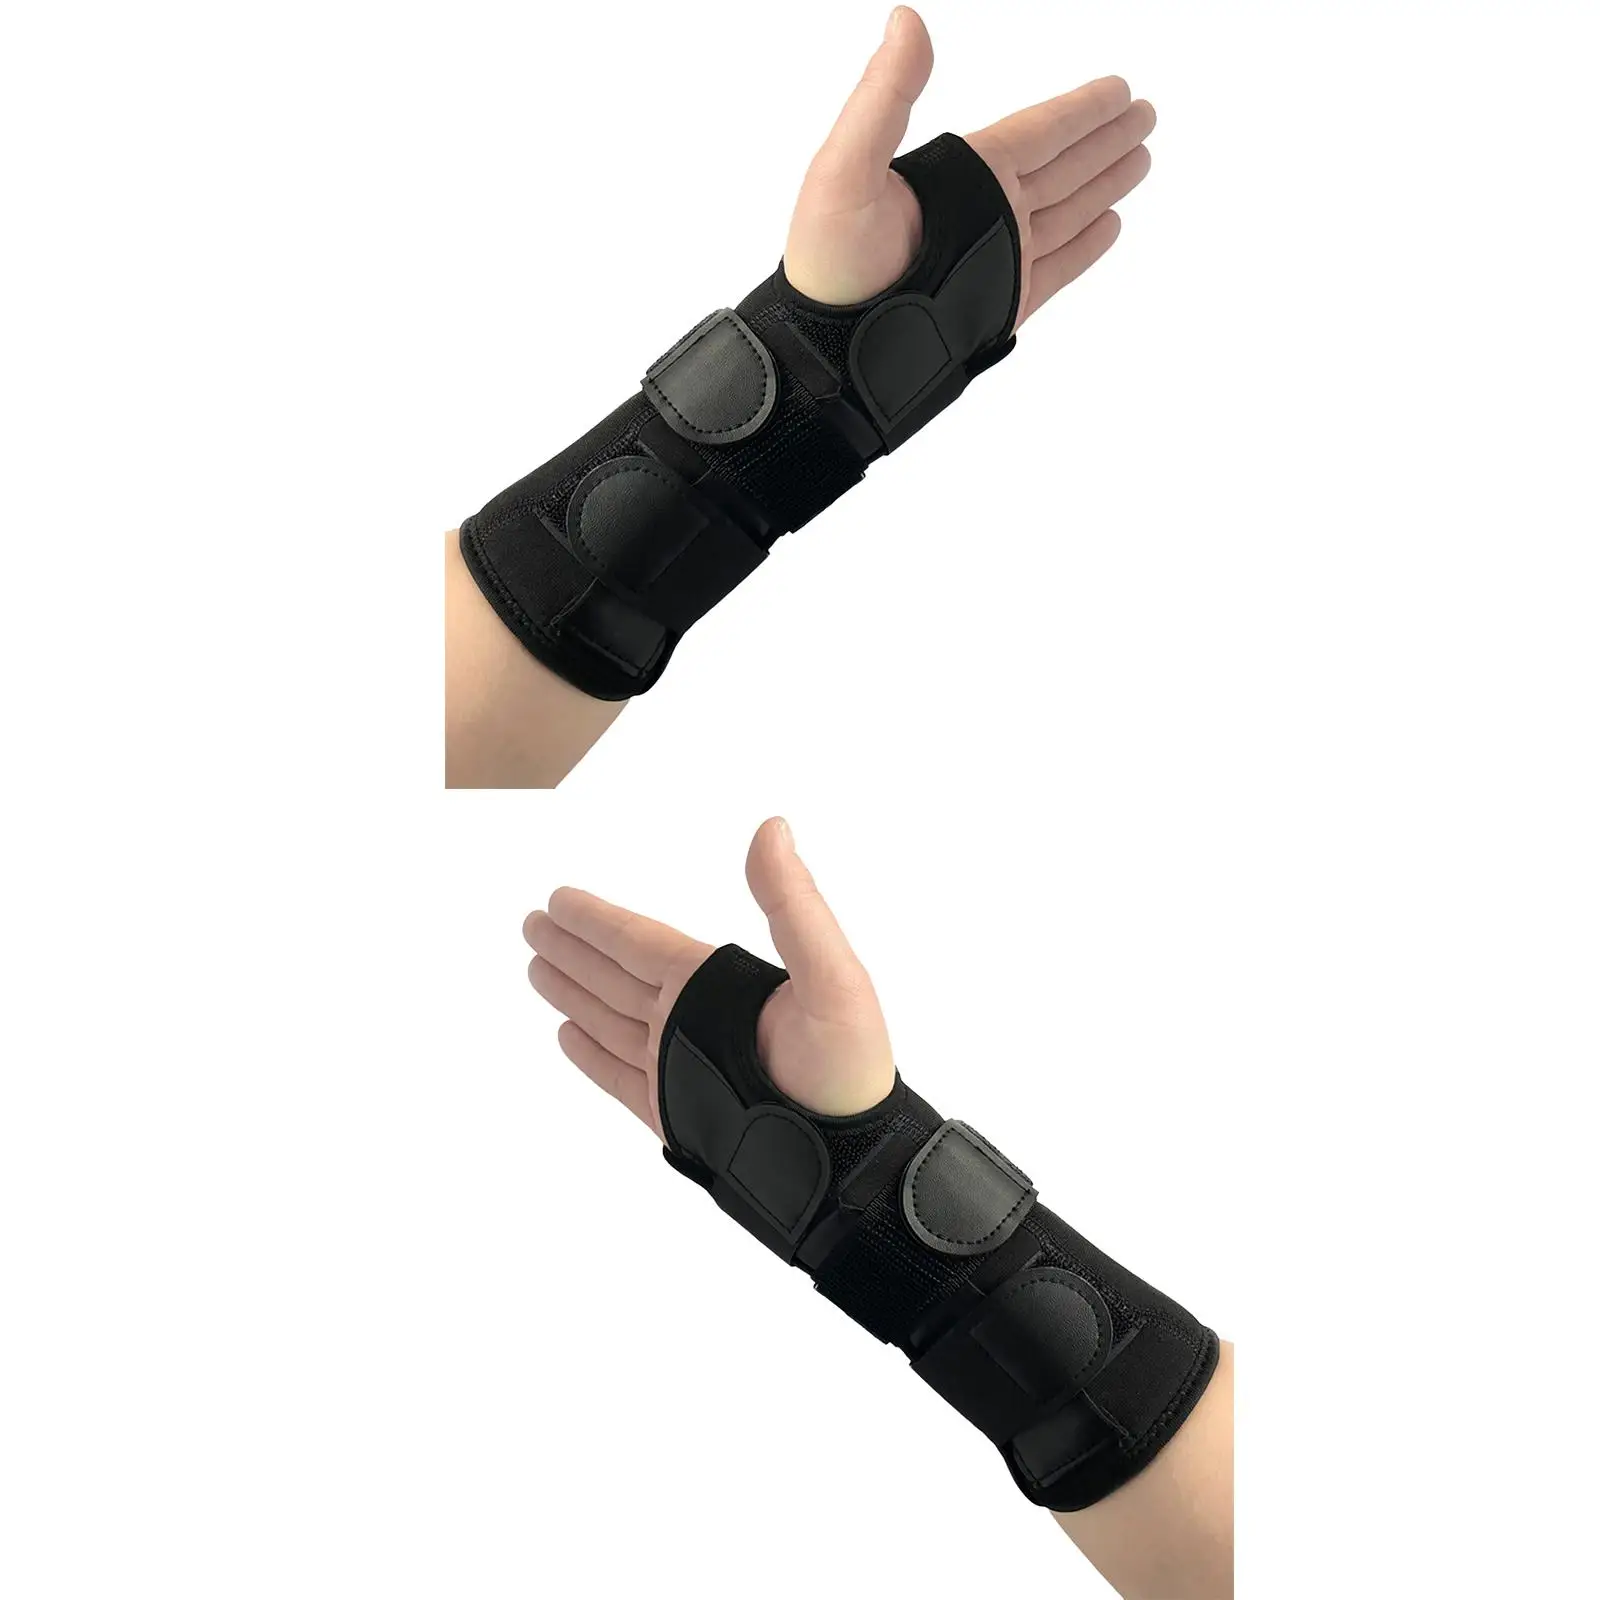 Wrist Brace Carpal Tunnel Detachable Protective Steel Plate Wrist Wraps Protect and Stabilize Wrist Guard for Weight Lifting